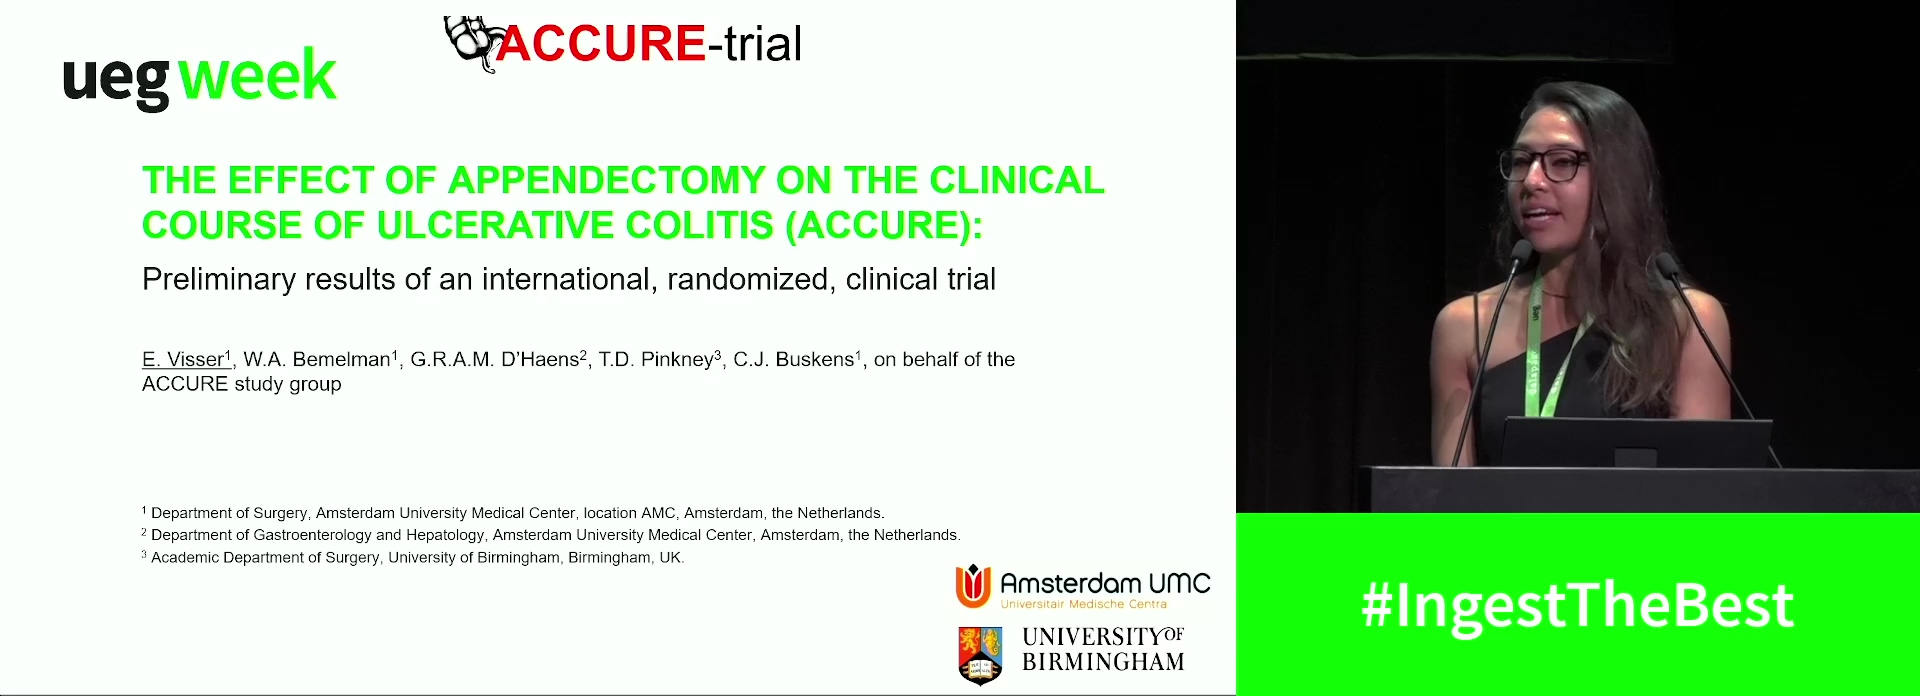 THE EFFECT OF APPENDECTOMY ON THE CLINICAL COURSE OF ULCERATIVE COLITIS (ACCURE): PRELIMINARY RESULTS OF AN INTERNATIONAL, RANDOMIZED, CLINICAL TRIAL